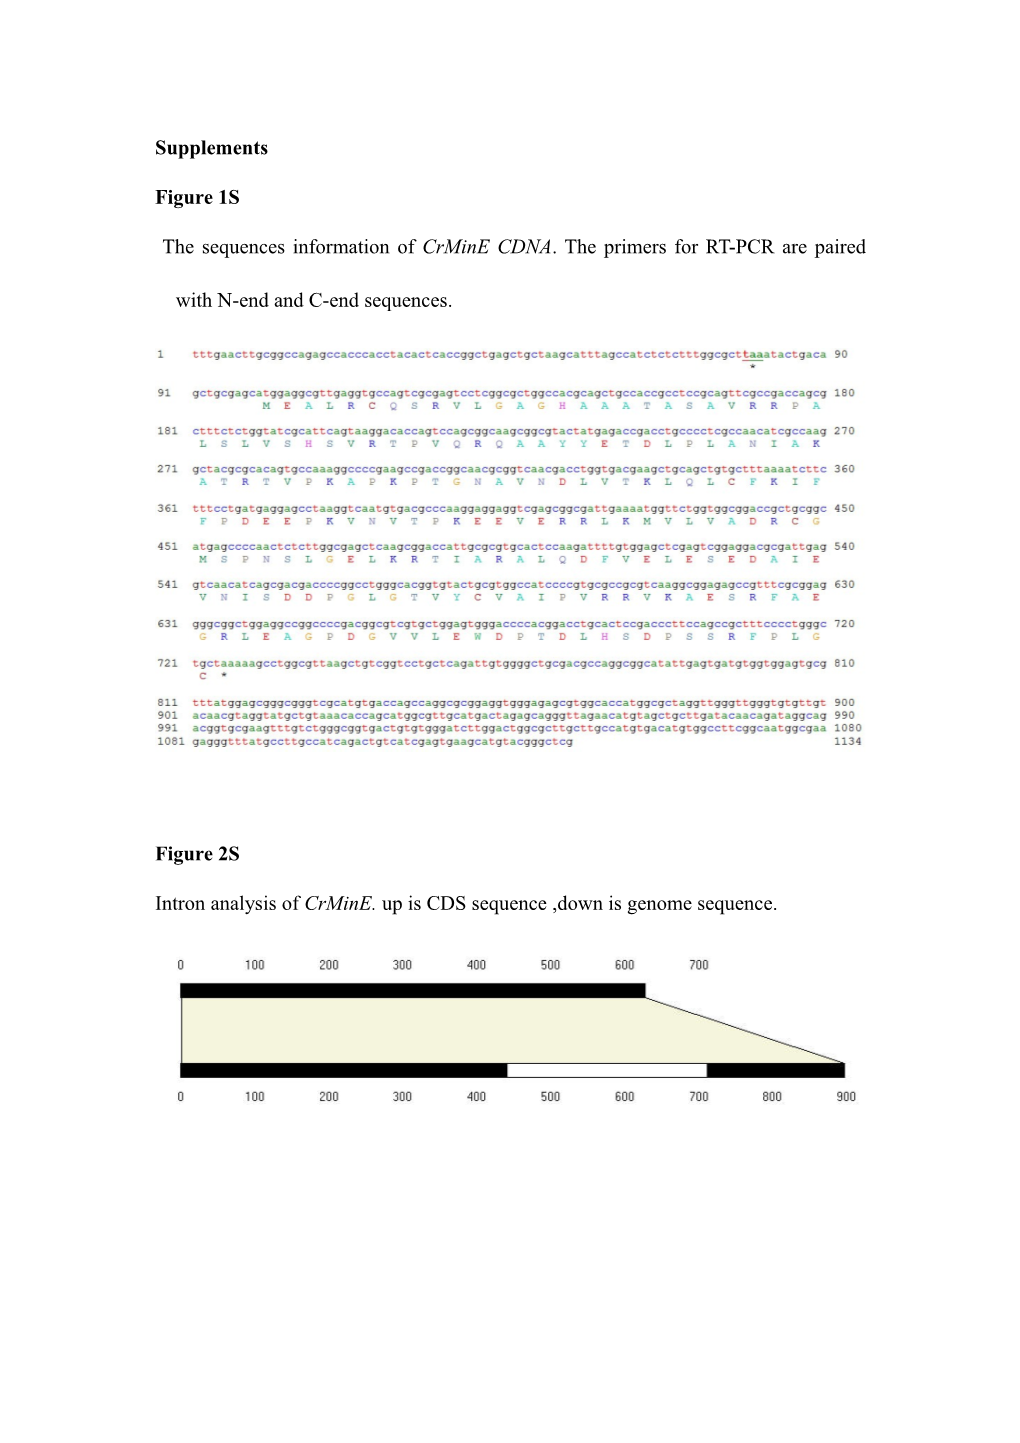 Intron Analysis of Crmine. up Is CDS Sequence ,Down Is Genome Sequence